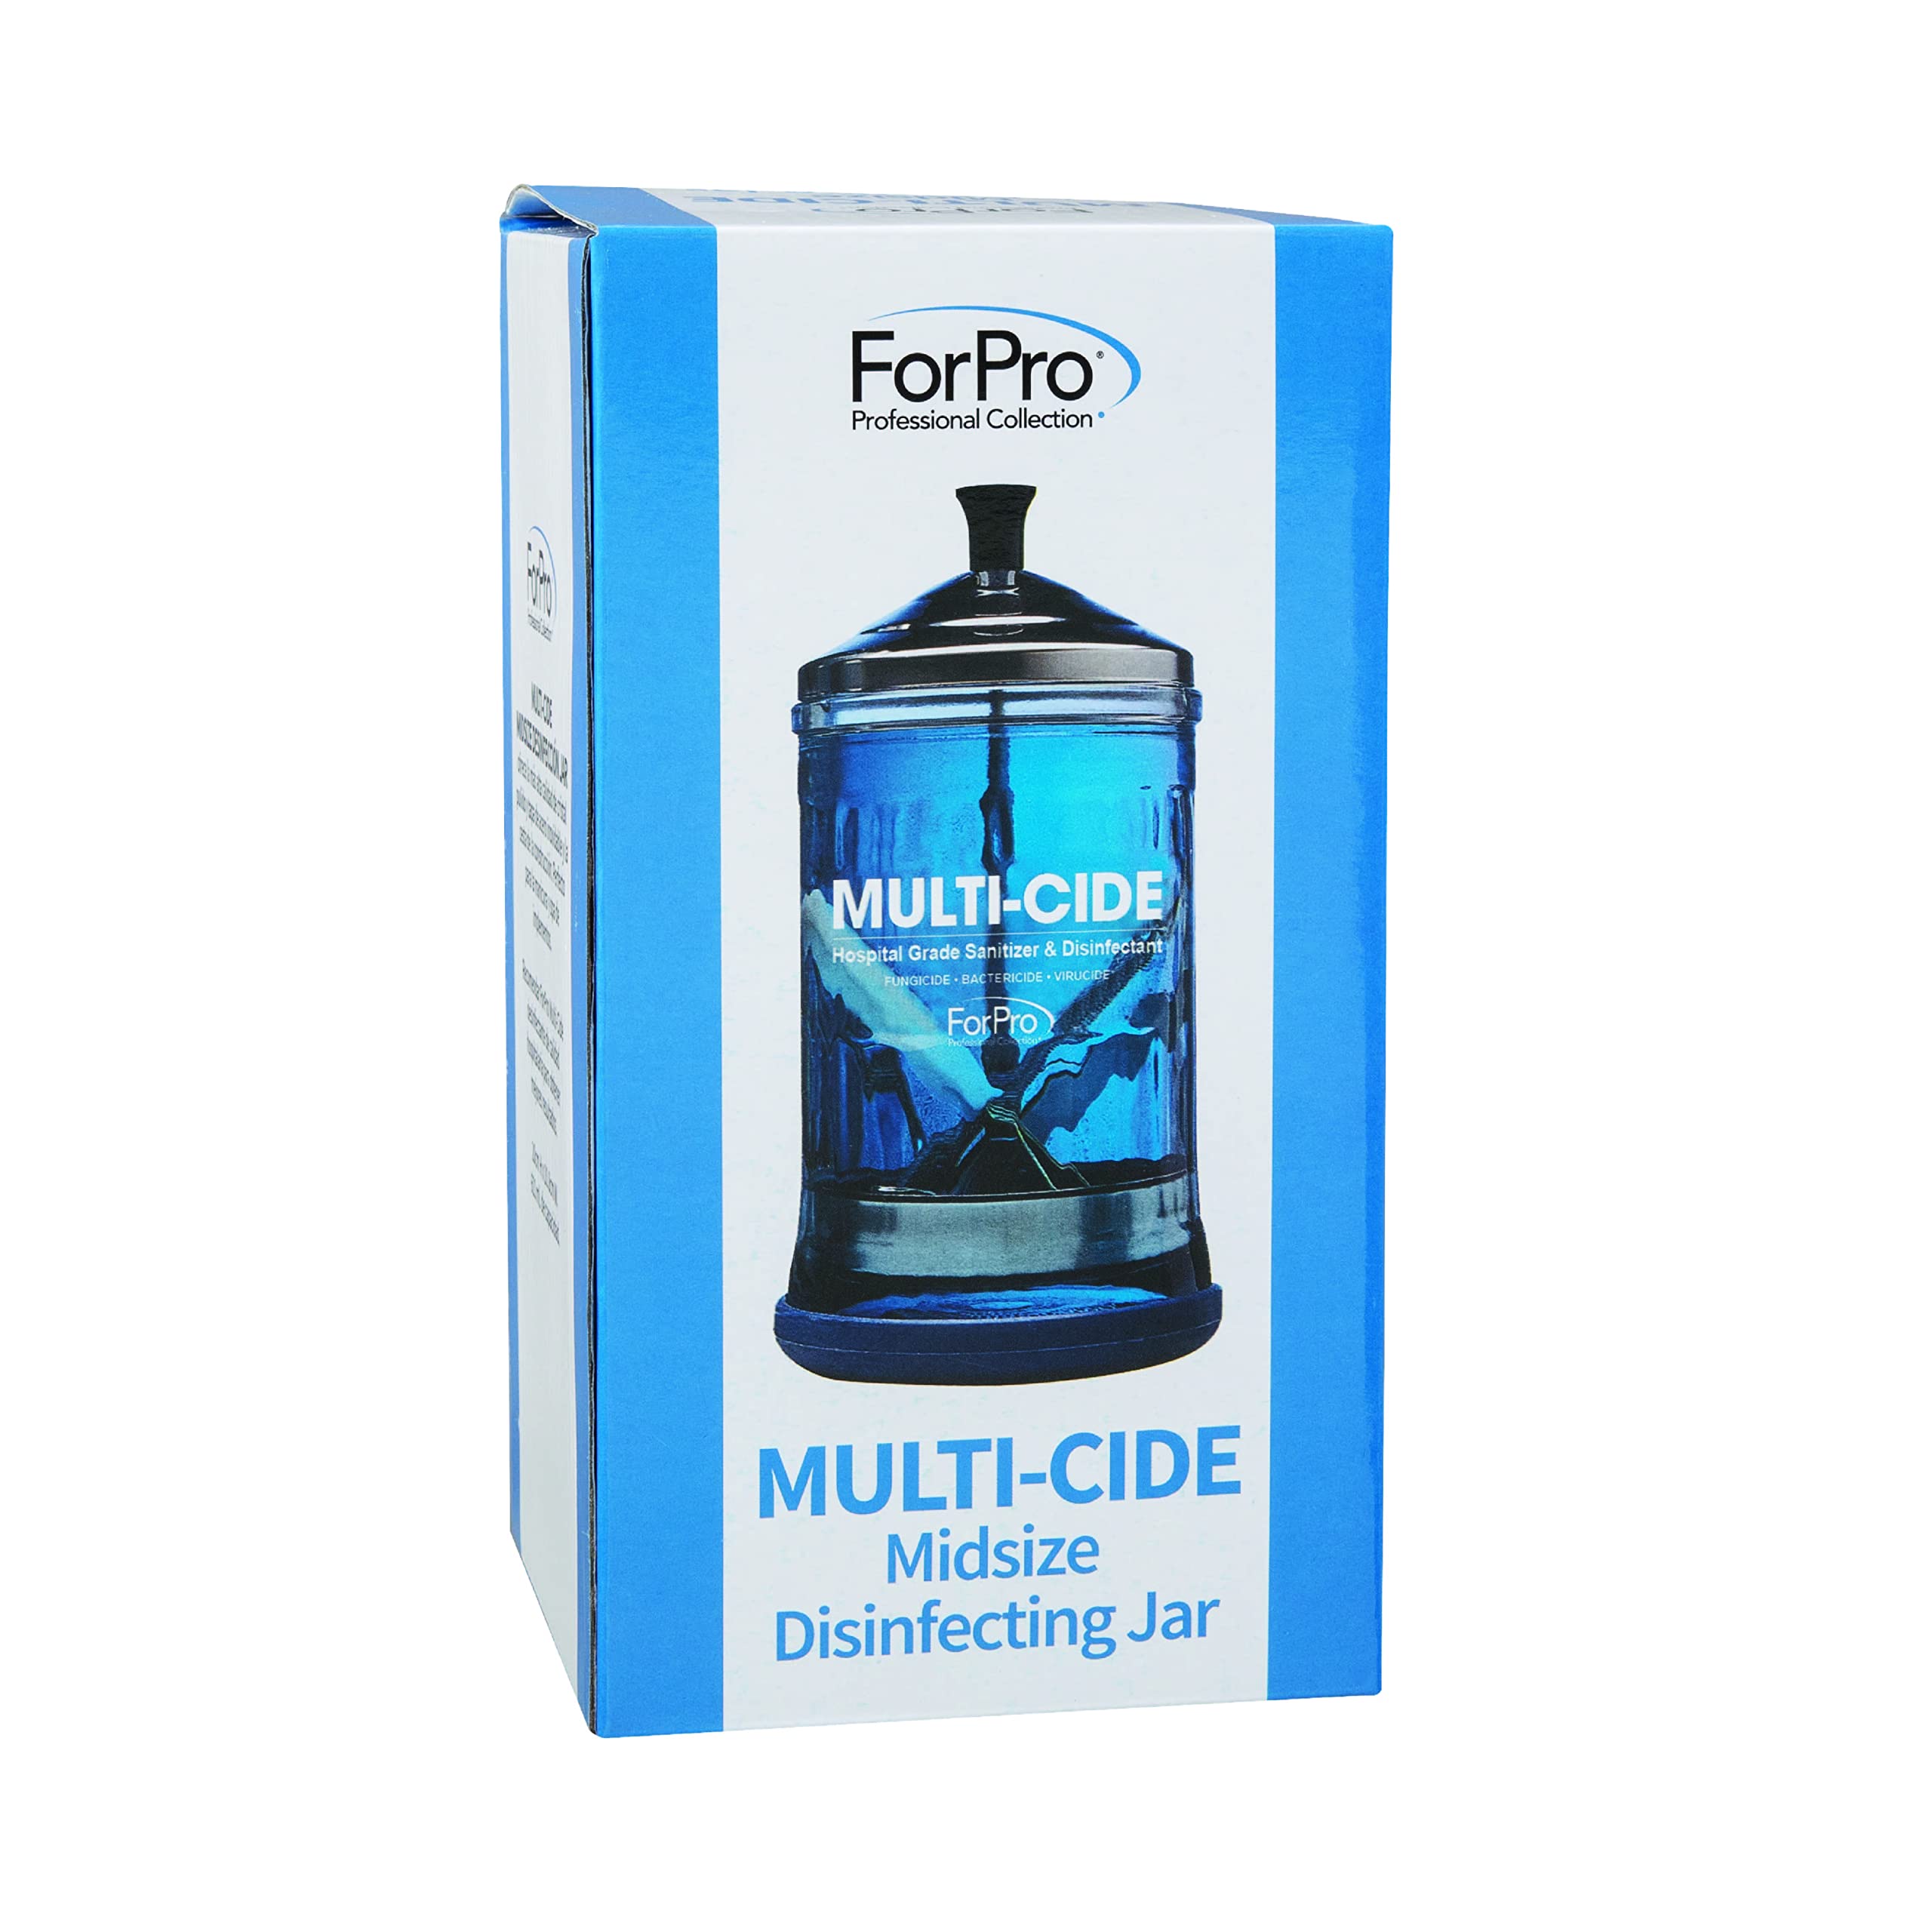 ForPro Multi-Cide Midsize Disinfecting Jar - Disinfectant Glass Jar for Manicure & Spa Implements - 21 Ounces, 8” H x 4.25” W